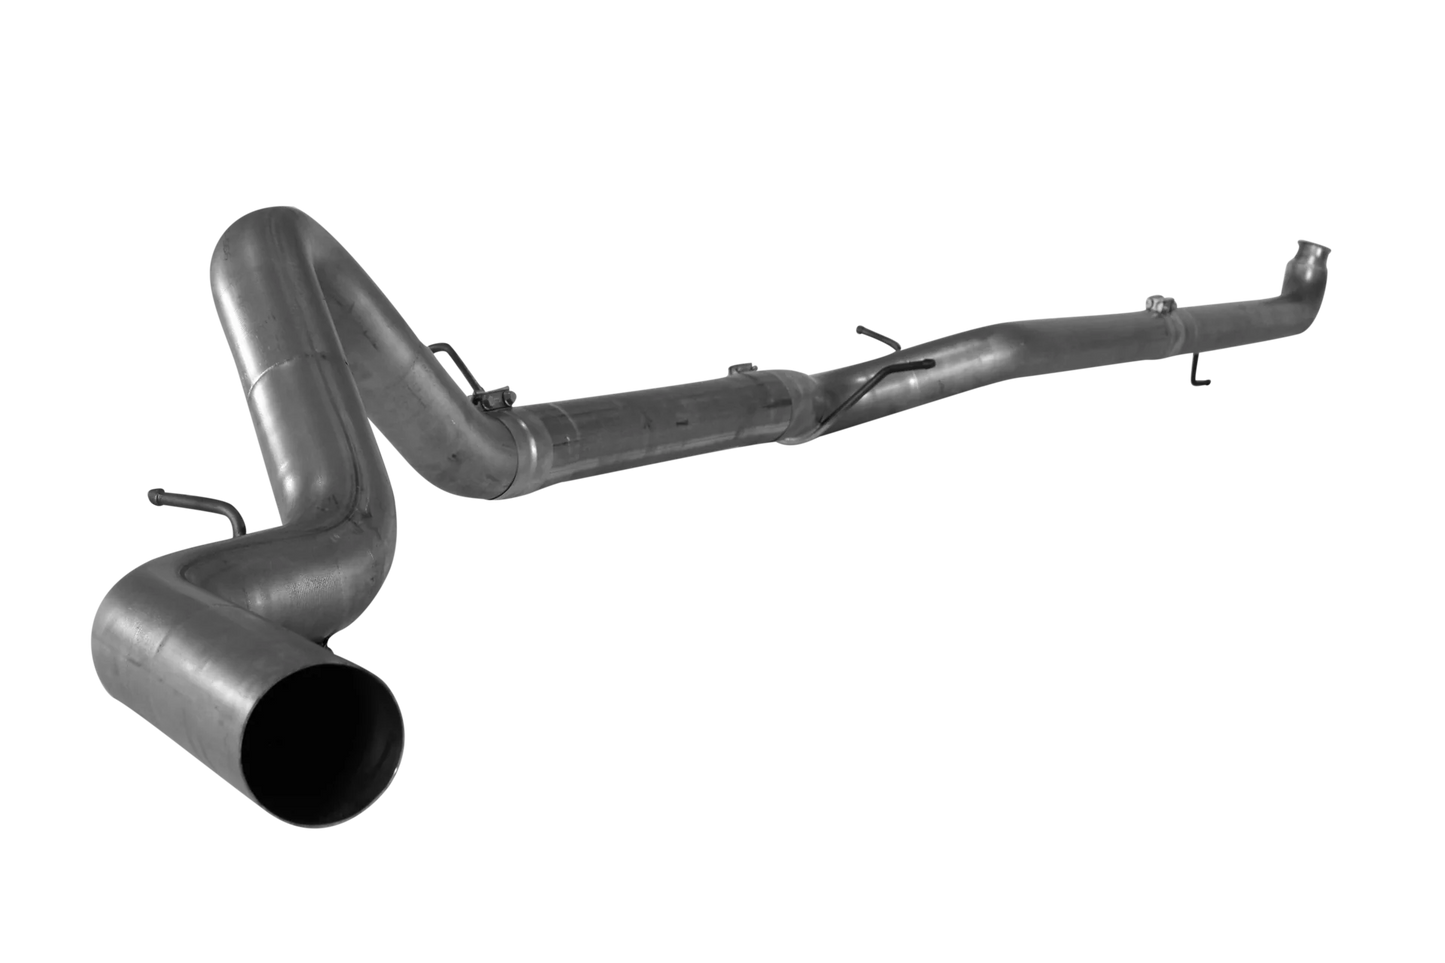 531001 531102 532001 532002 Mel's Manufacturing 5" Downpipe Back Single | 2007.5-2010 GM 2500/3500 6.6L DURAMAX Mels Mfg FloPro Flo-Pro Flo Pro Hell On Wheels Performance Ltd Limited Canadian Owned and Operated Online Diesel Parts Distribution & Wholesale Supply Center in Alberta Canada Shipping Supplying to Alberta British Columbia Sask Saskatchewan Manitoba Ontario Quebec Newfoundland Labrador New Brunswick Nova Scotia Prince Edward Island AB BC SK MB ON QC PQ NS NB NFLD N.L. PEI